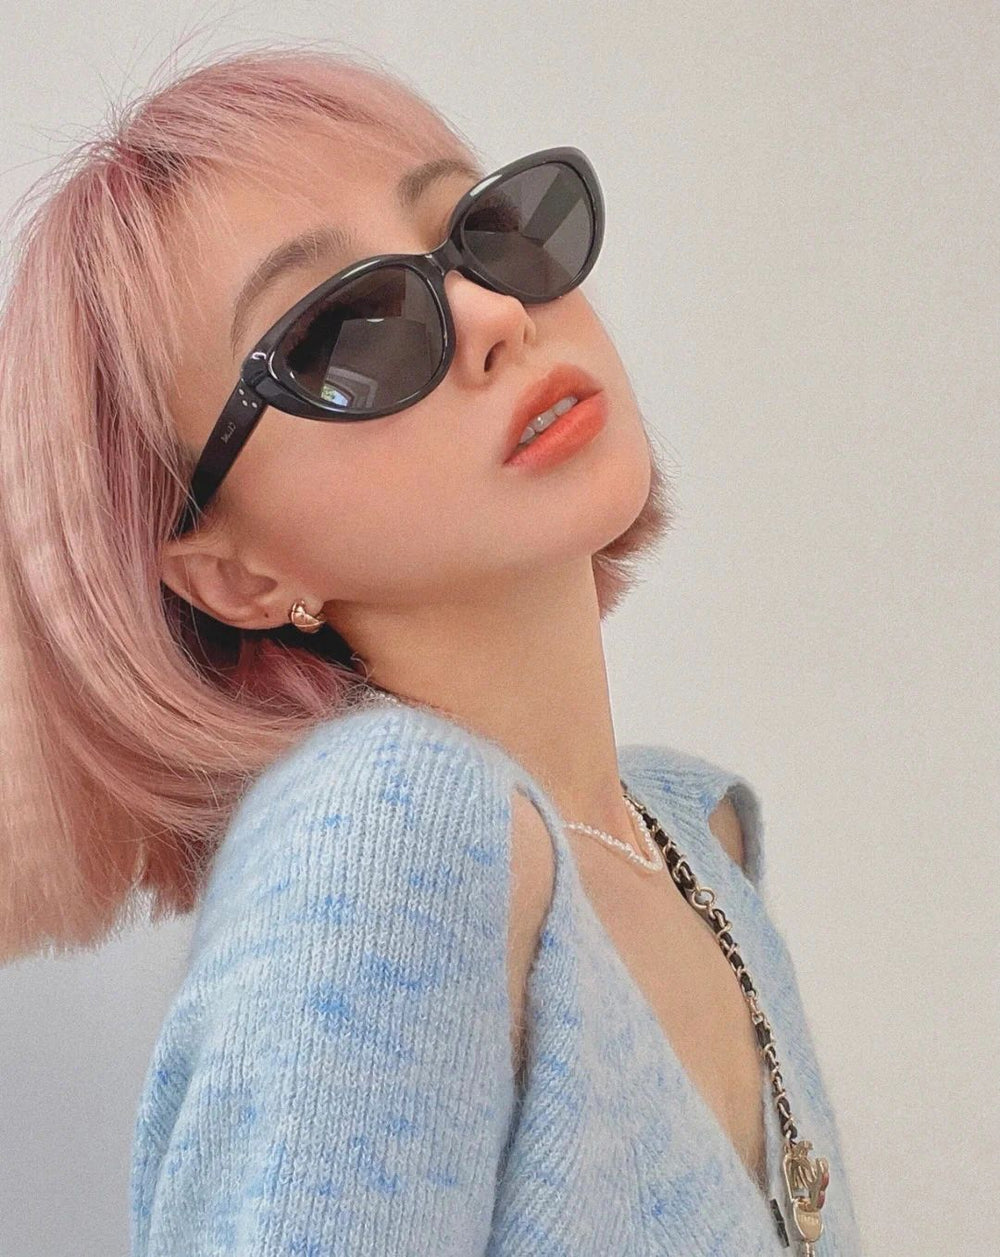 Witness the embodiment of glamour! Adorned with stunning pink hair, this fashionable woman exudes an air of sophistication, accentuated by her trendy sunglasses.